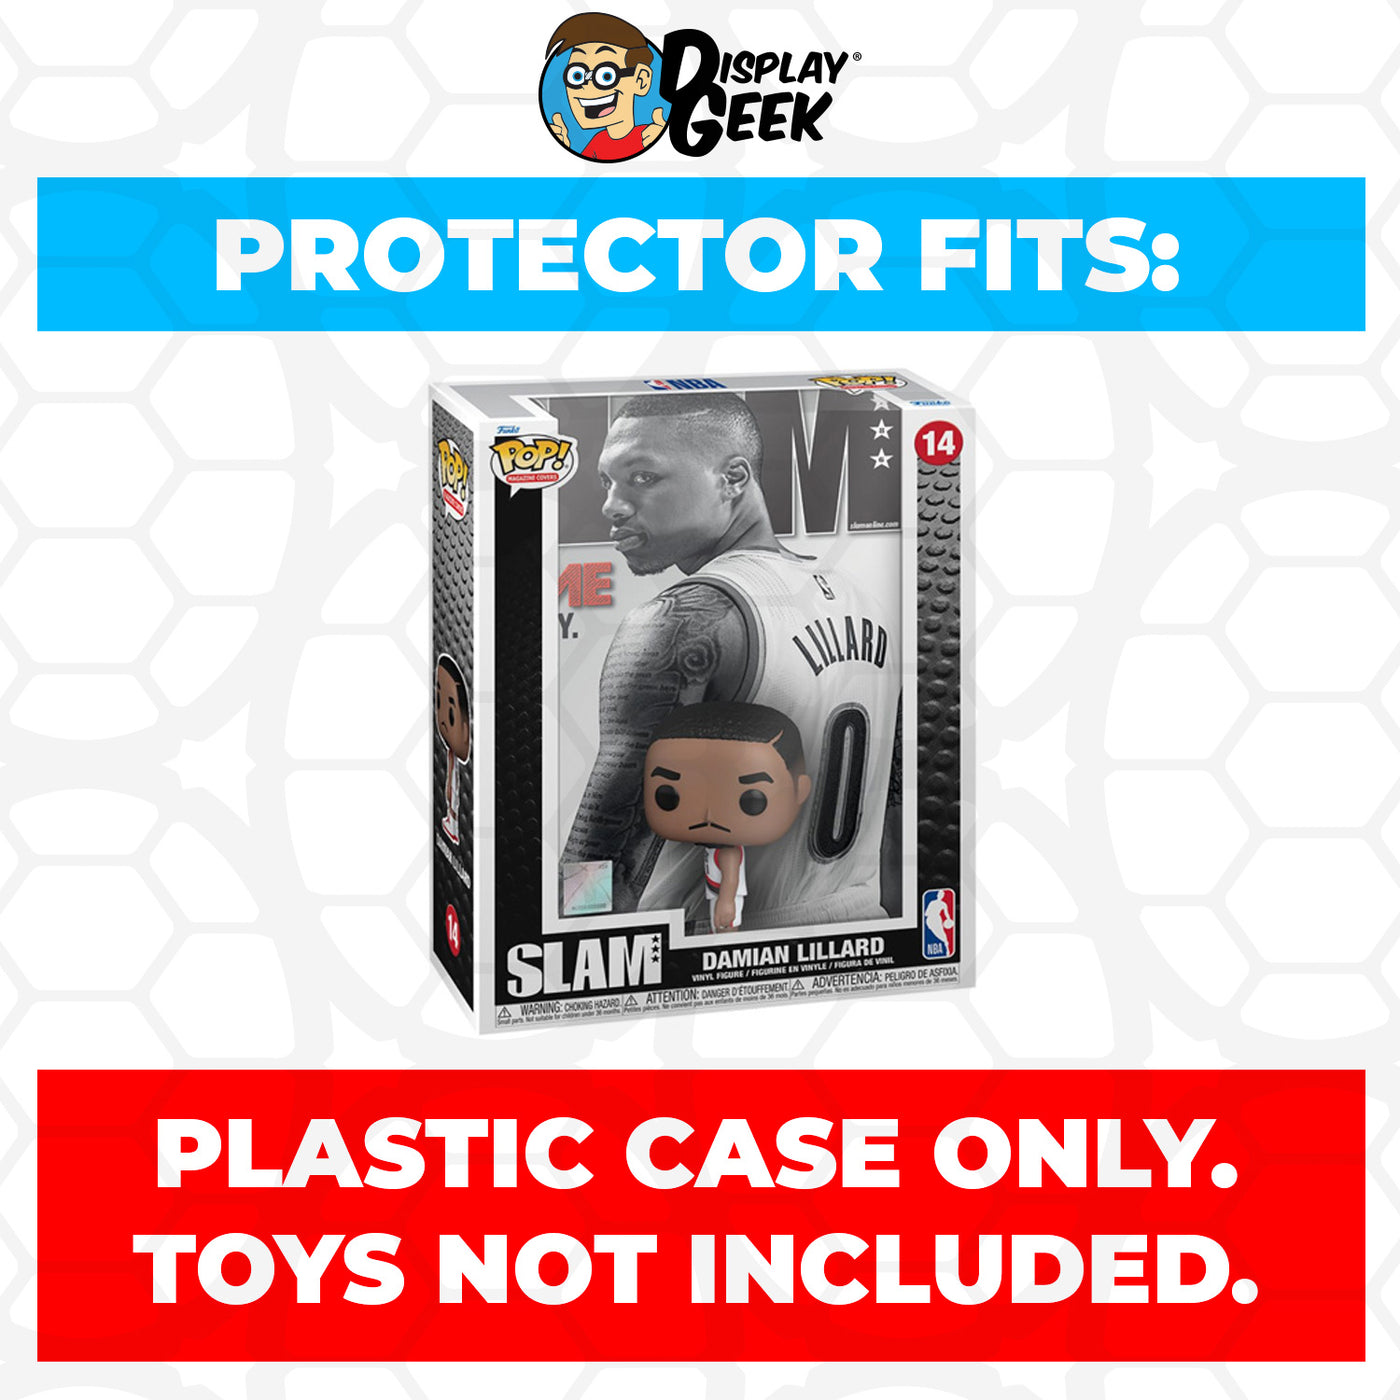 Pop Protector for Damian Lillard #14 Funko Pop Magazine Covers on The Protector Guide App by Display Geek